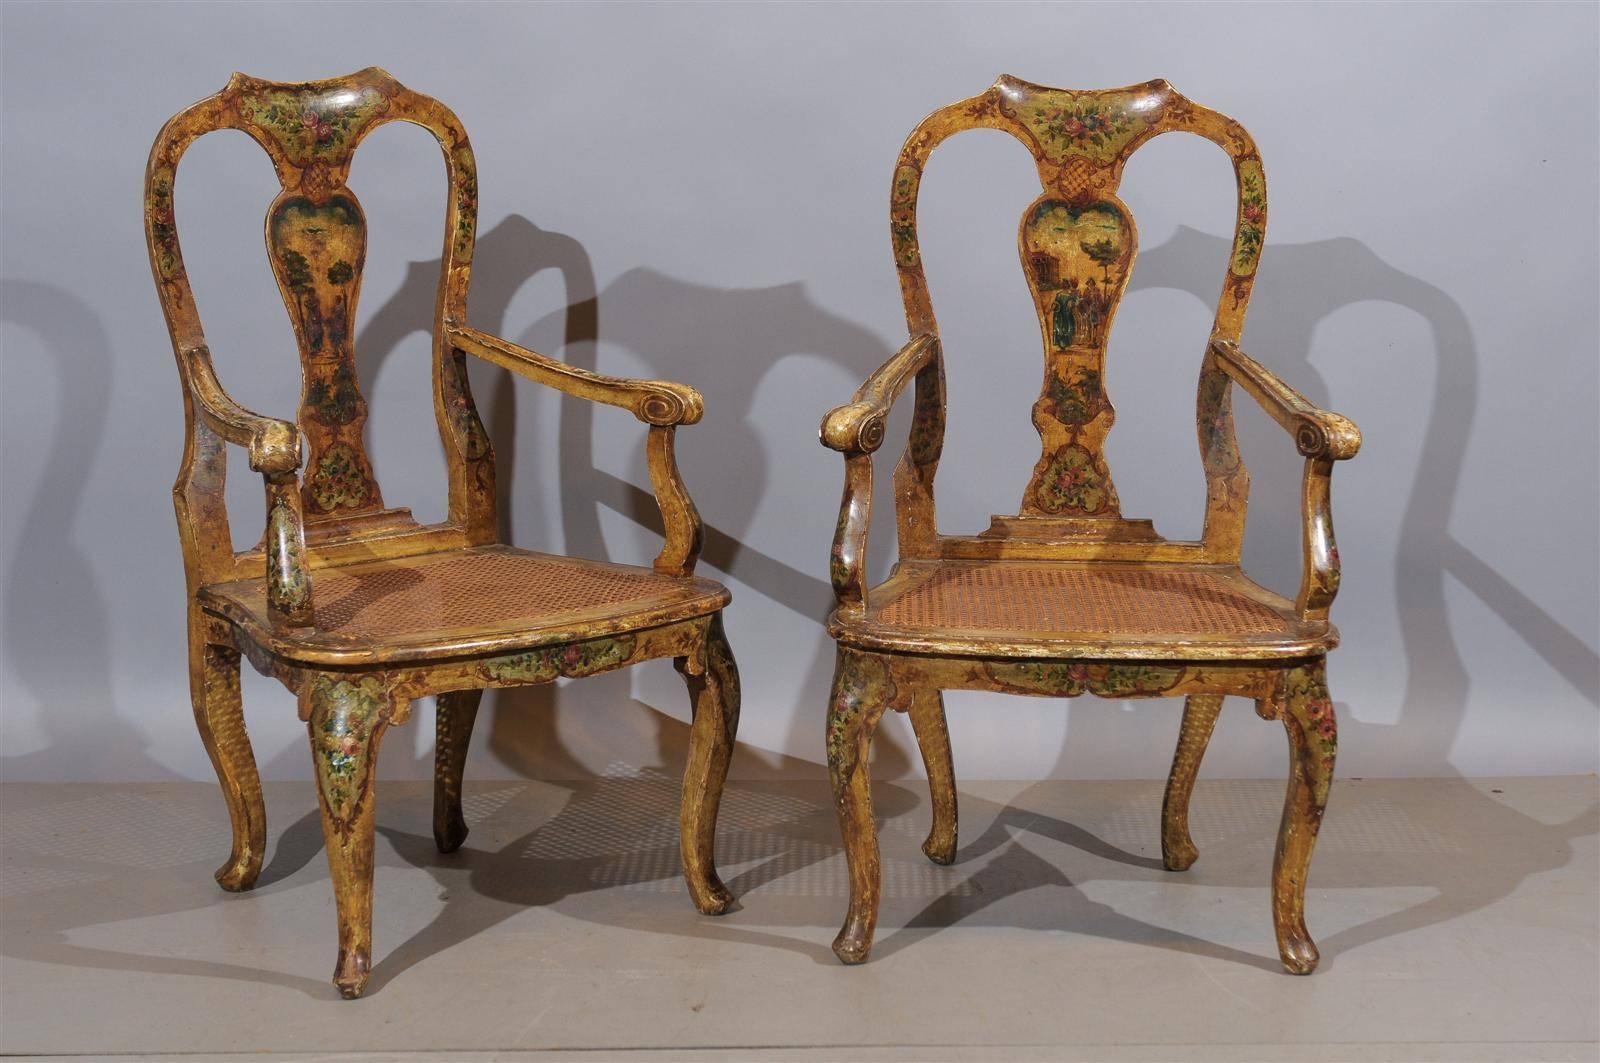 A pair of 18th century Venetian painted fauteuils with cane seats and floral decoration.

